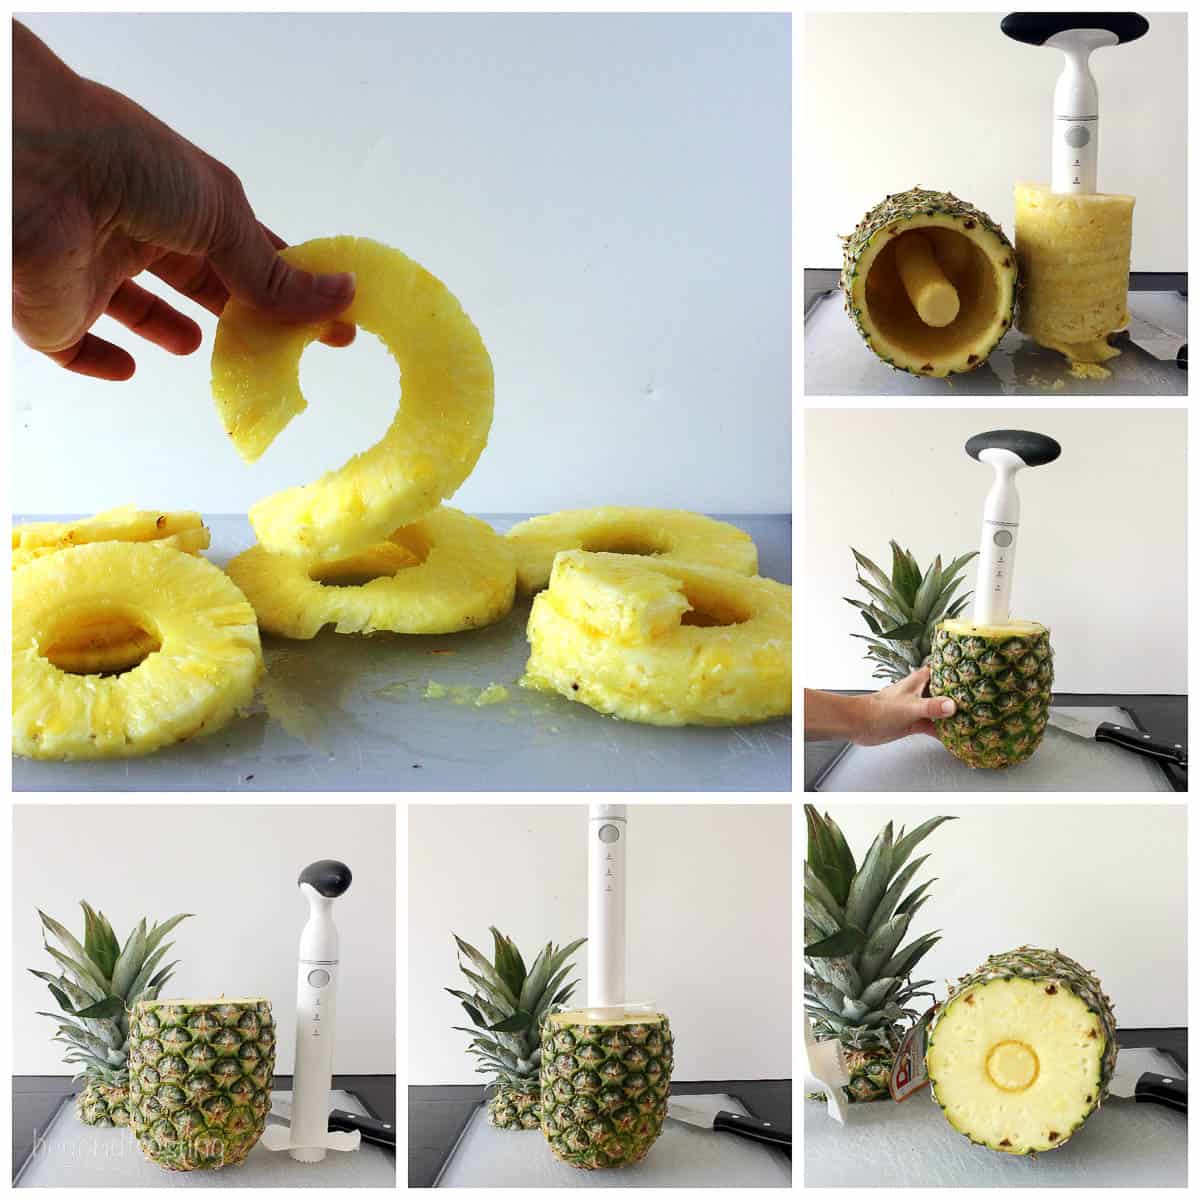 in process shots on how to cut a pineapple